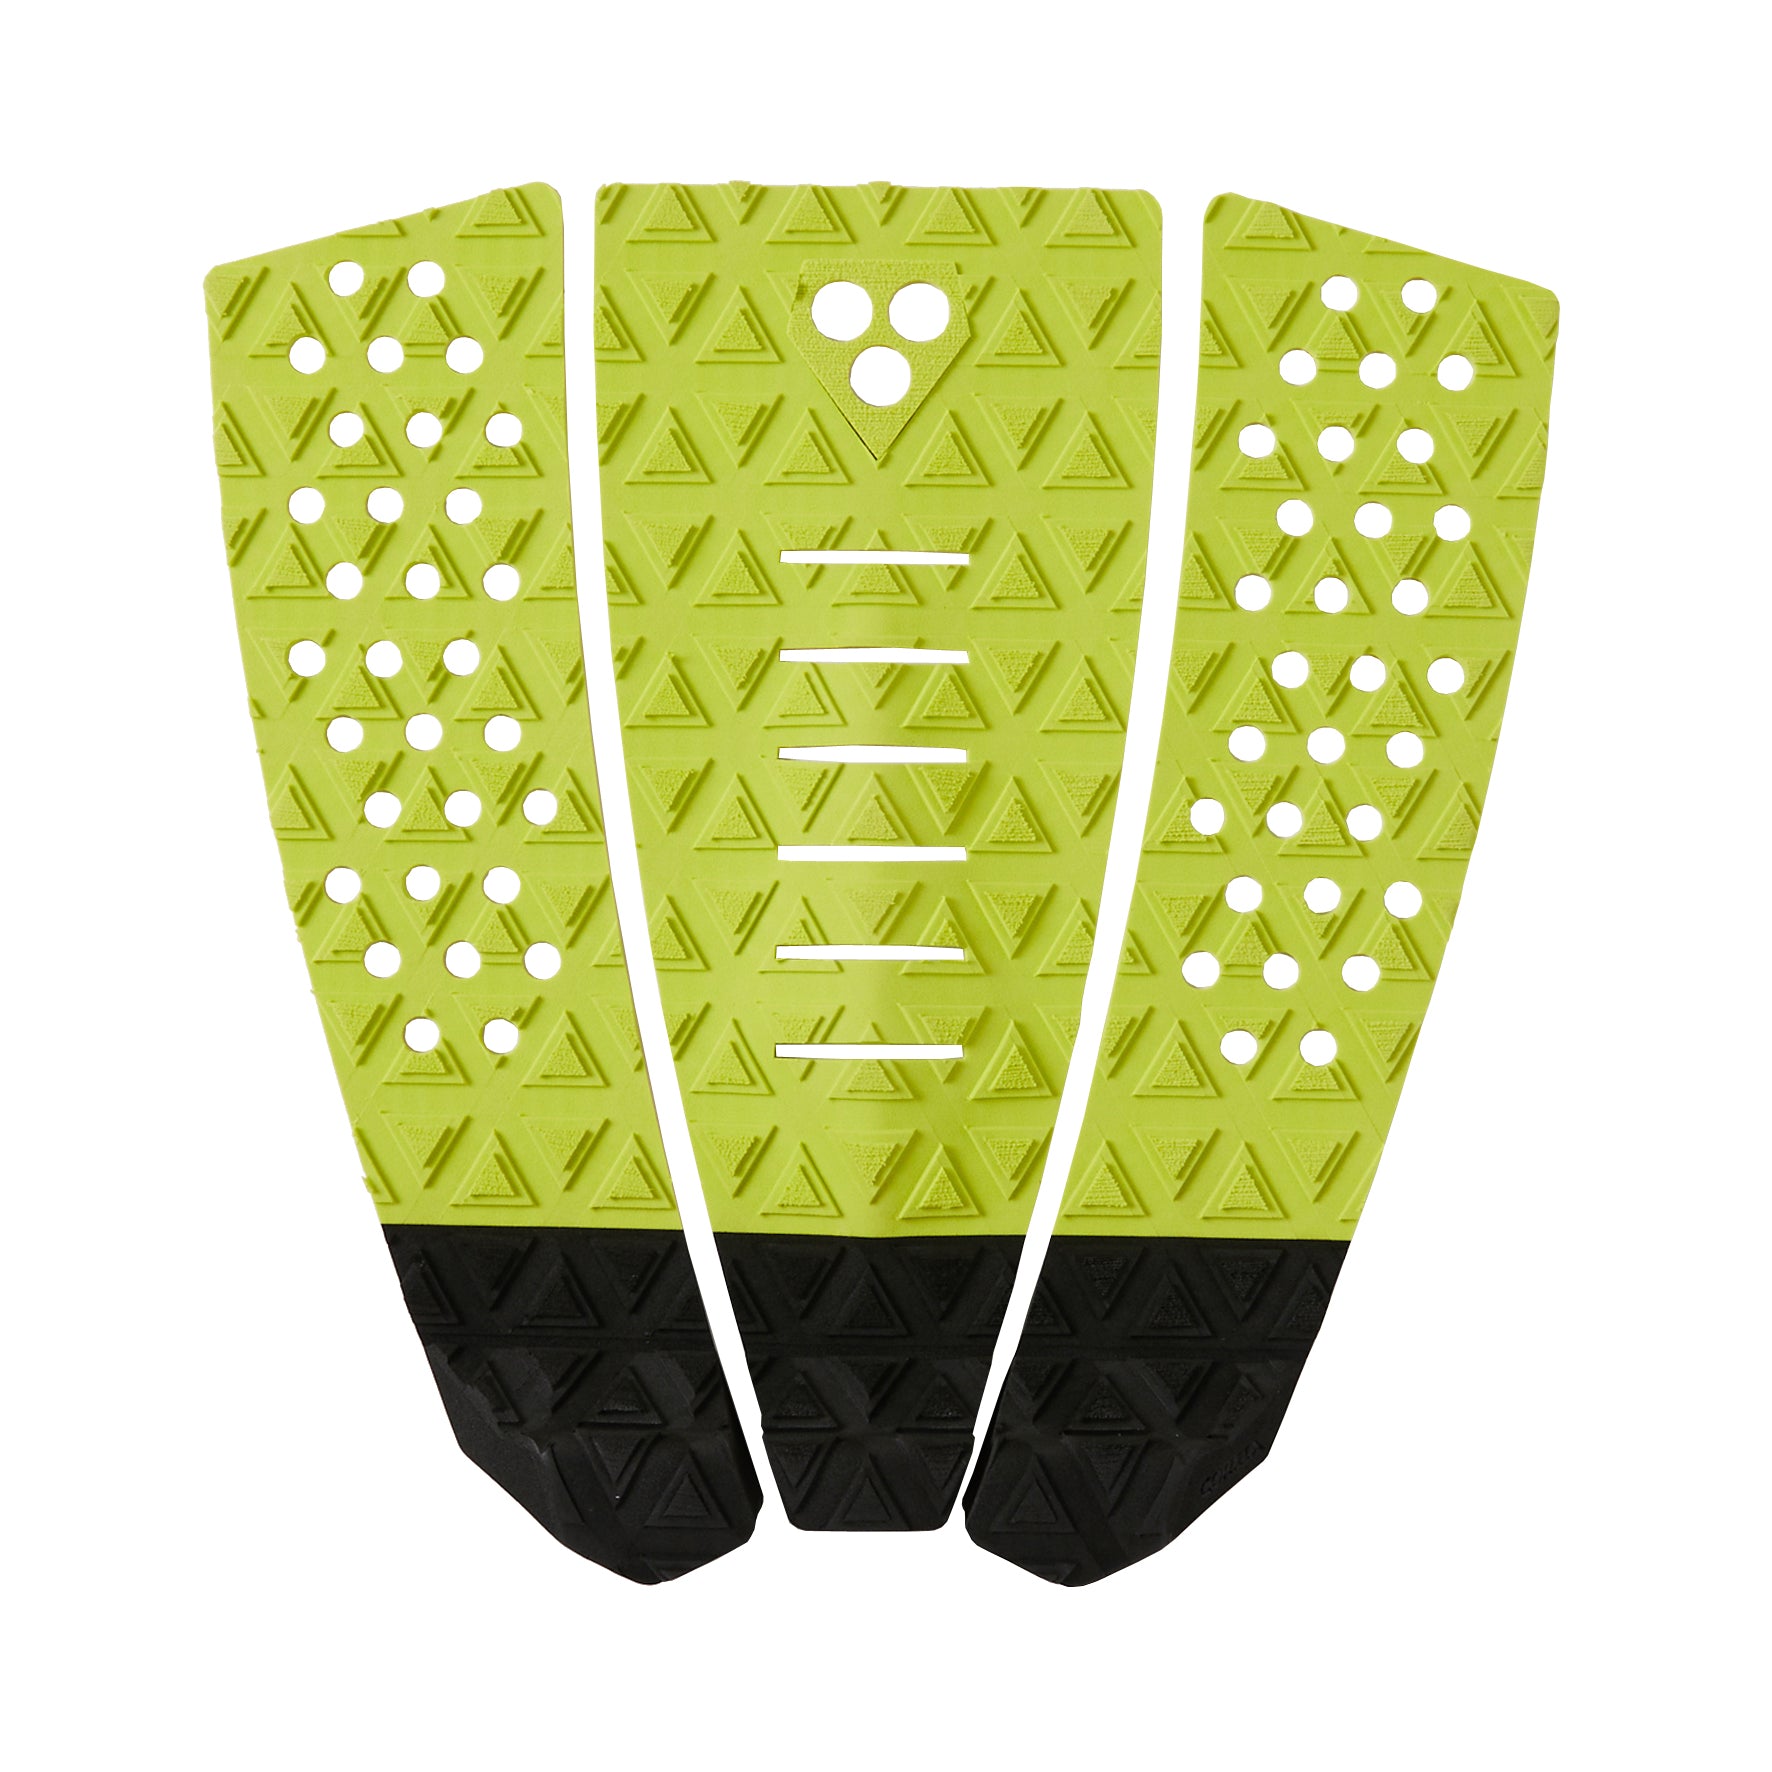 Gorilla Tres Traction Pad Limelight-Black